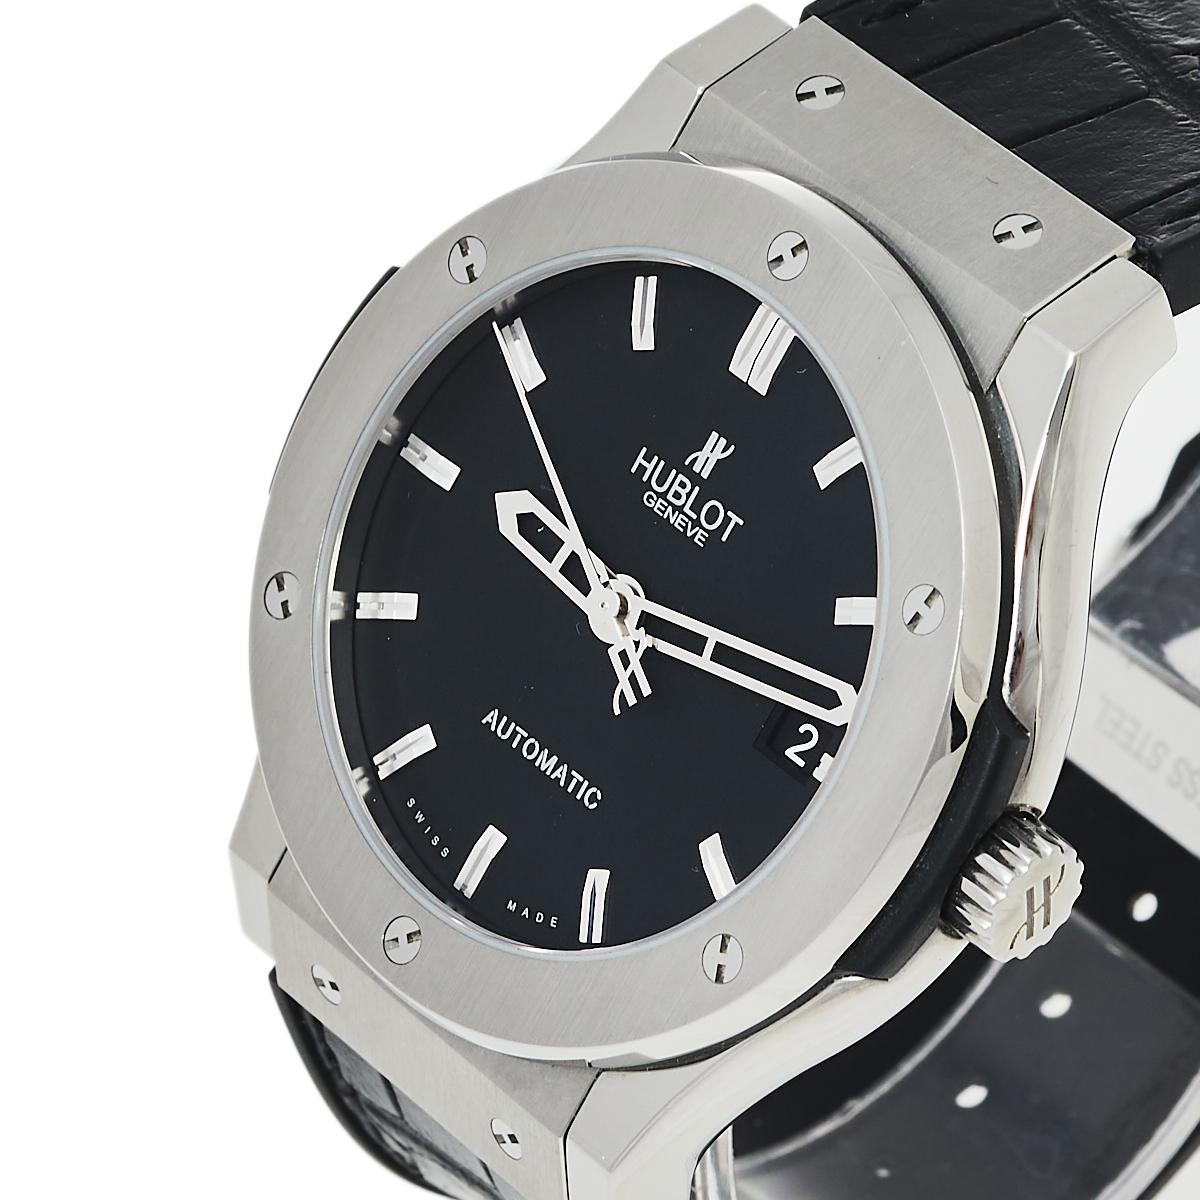 Not only is this stylish Hublot Classic Fusion wristwatch comfortable to wear, but it’s also well-crafted and attractive. The titanium case with a punctuated bezel surrounding a black dial on a tonal strap looks elegantly timeless. Its impressive